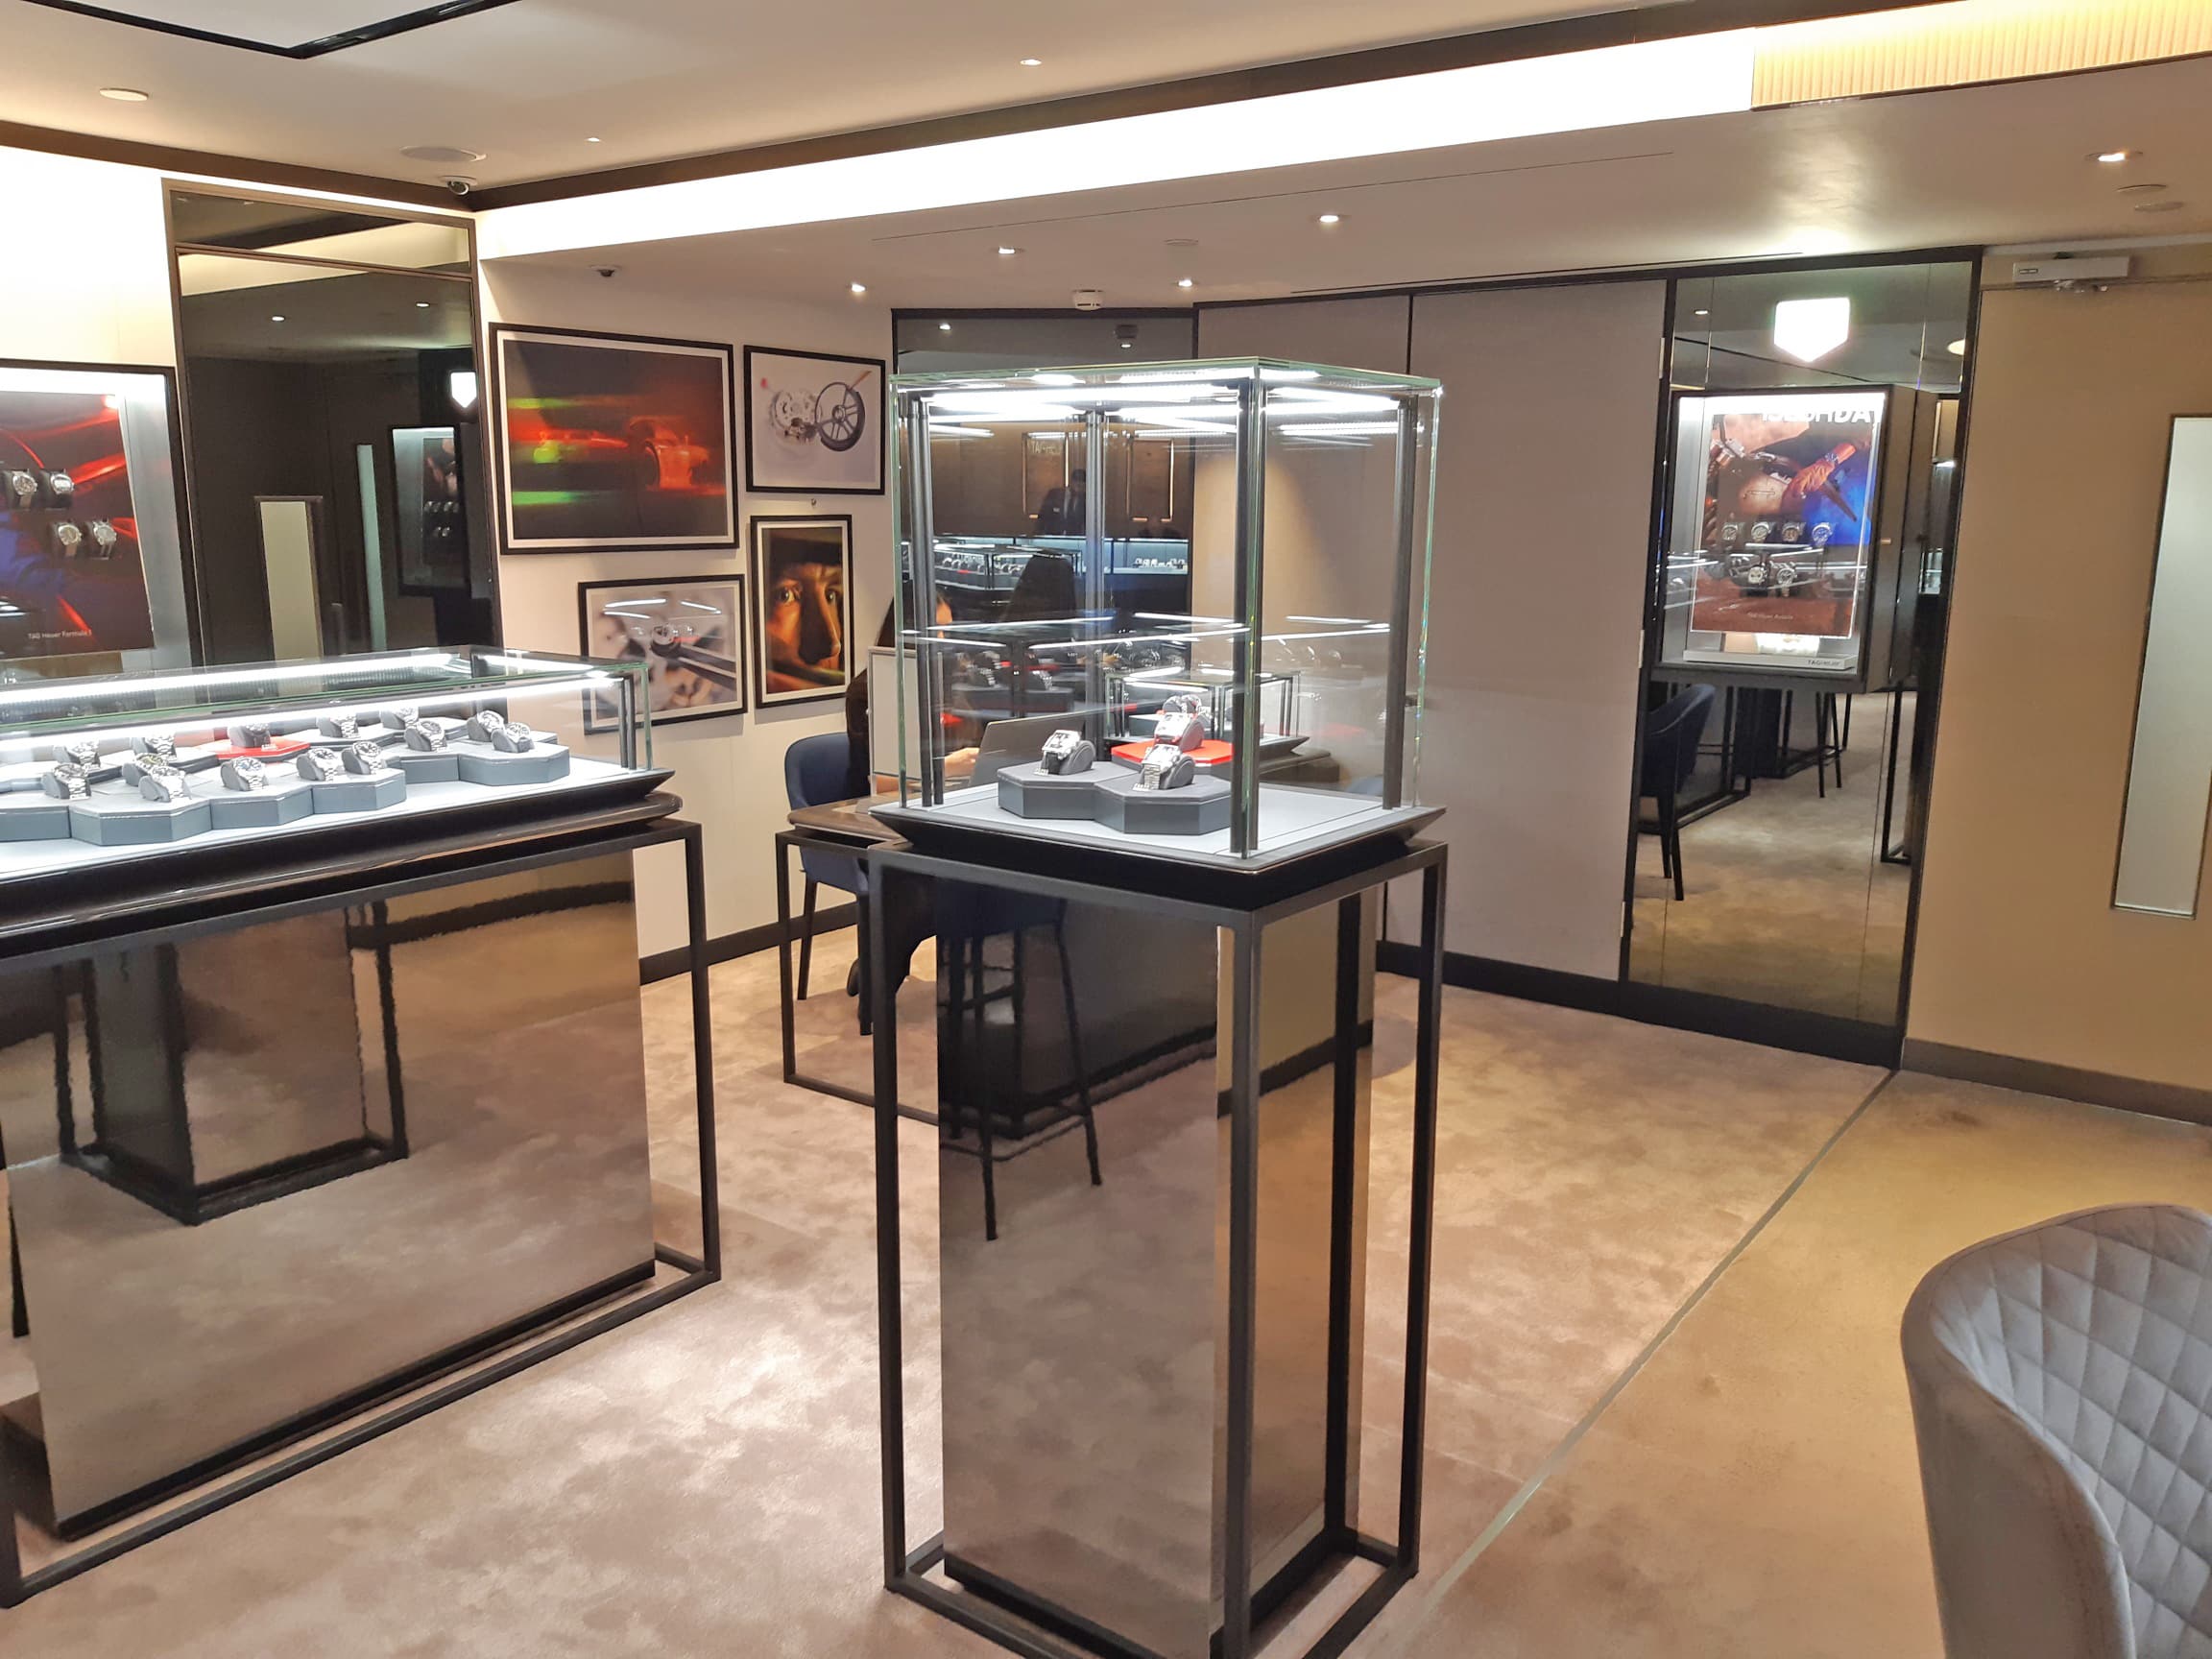 special material choice for TAG Heuer shopfitting in Harrods London